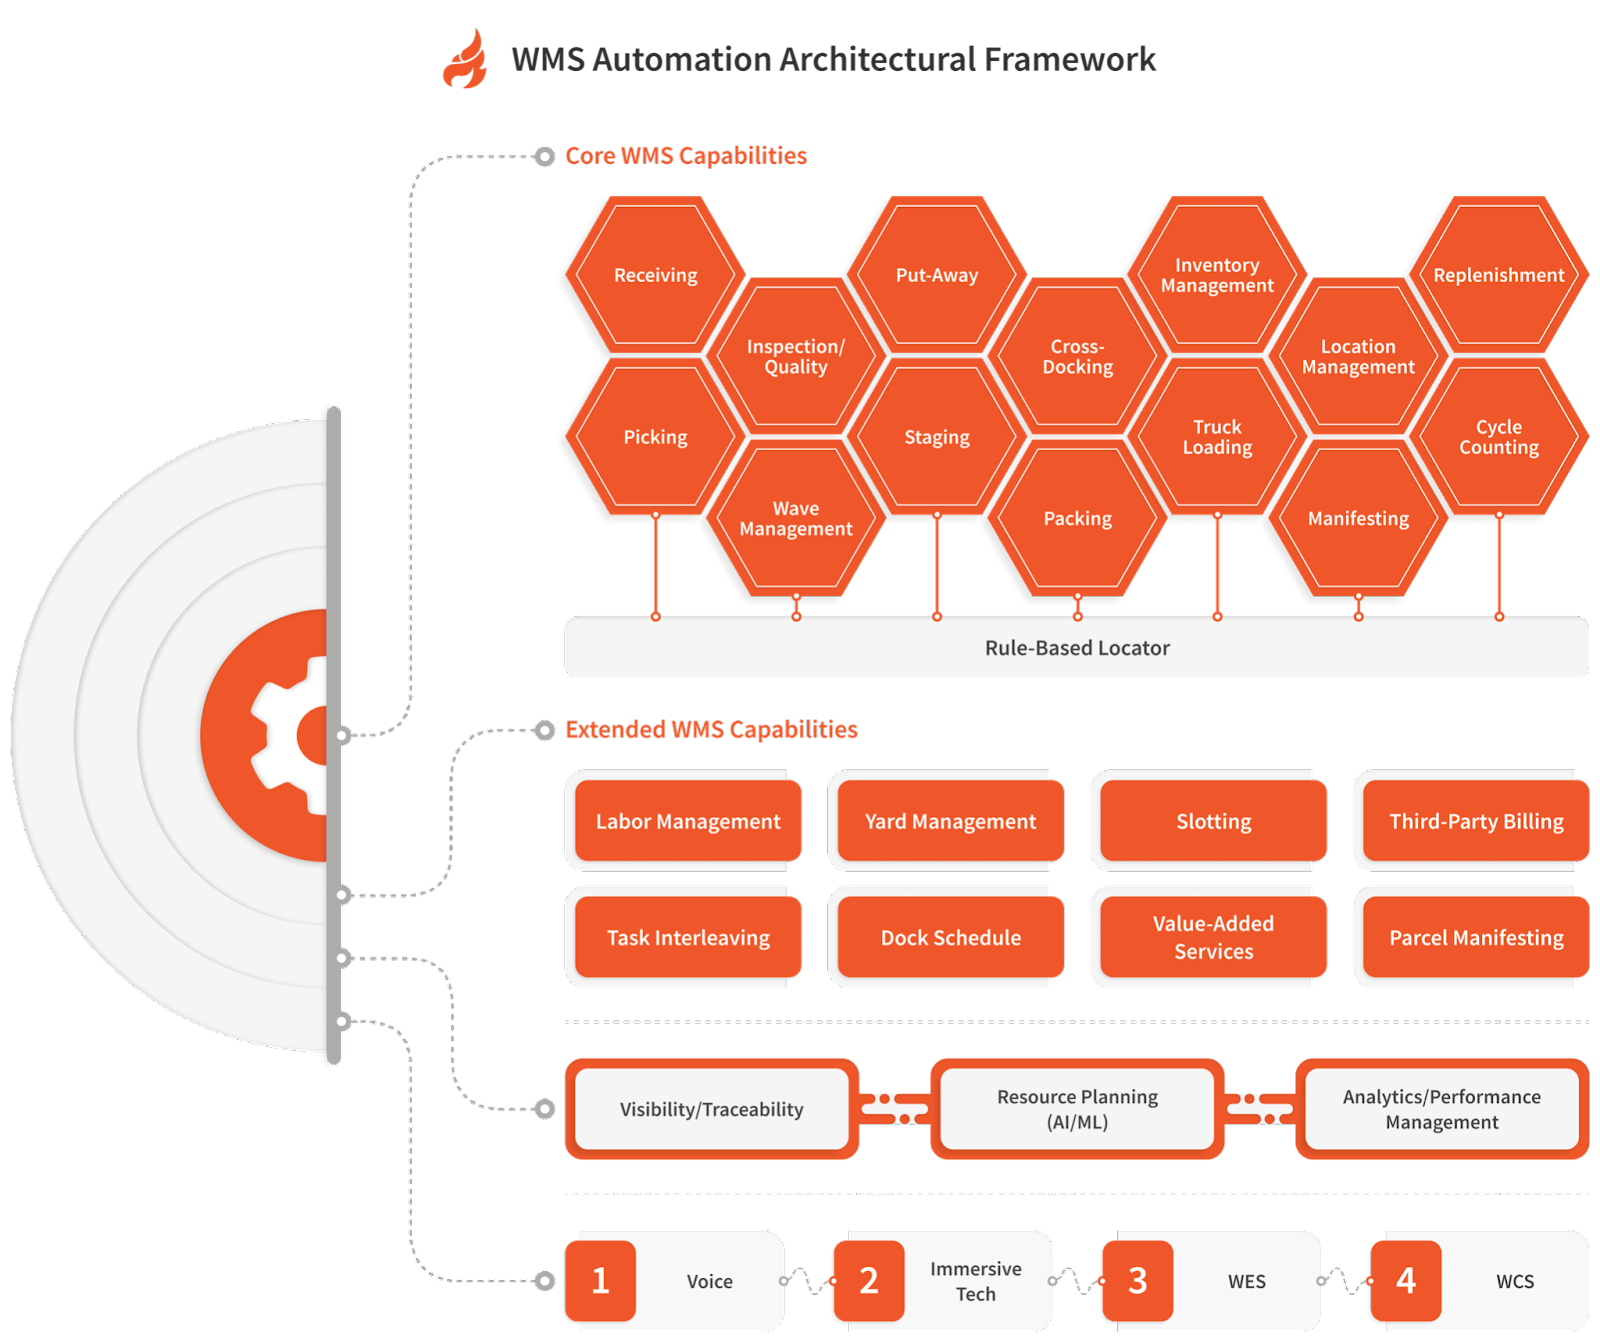 WMS Automation Architectural Framework